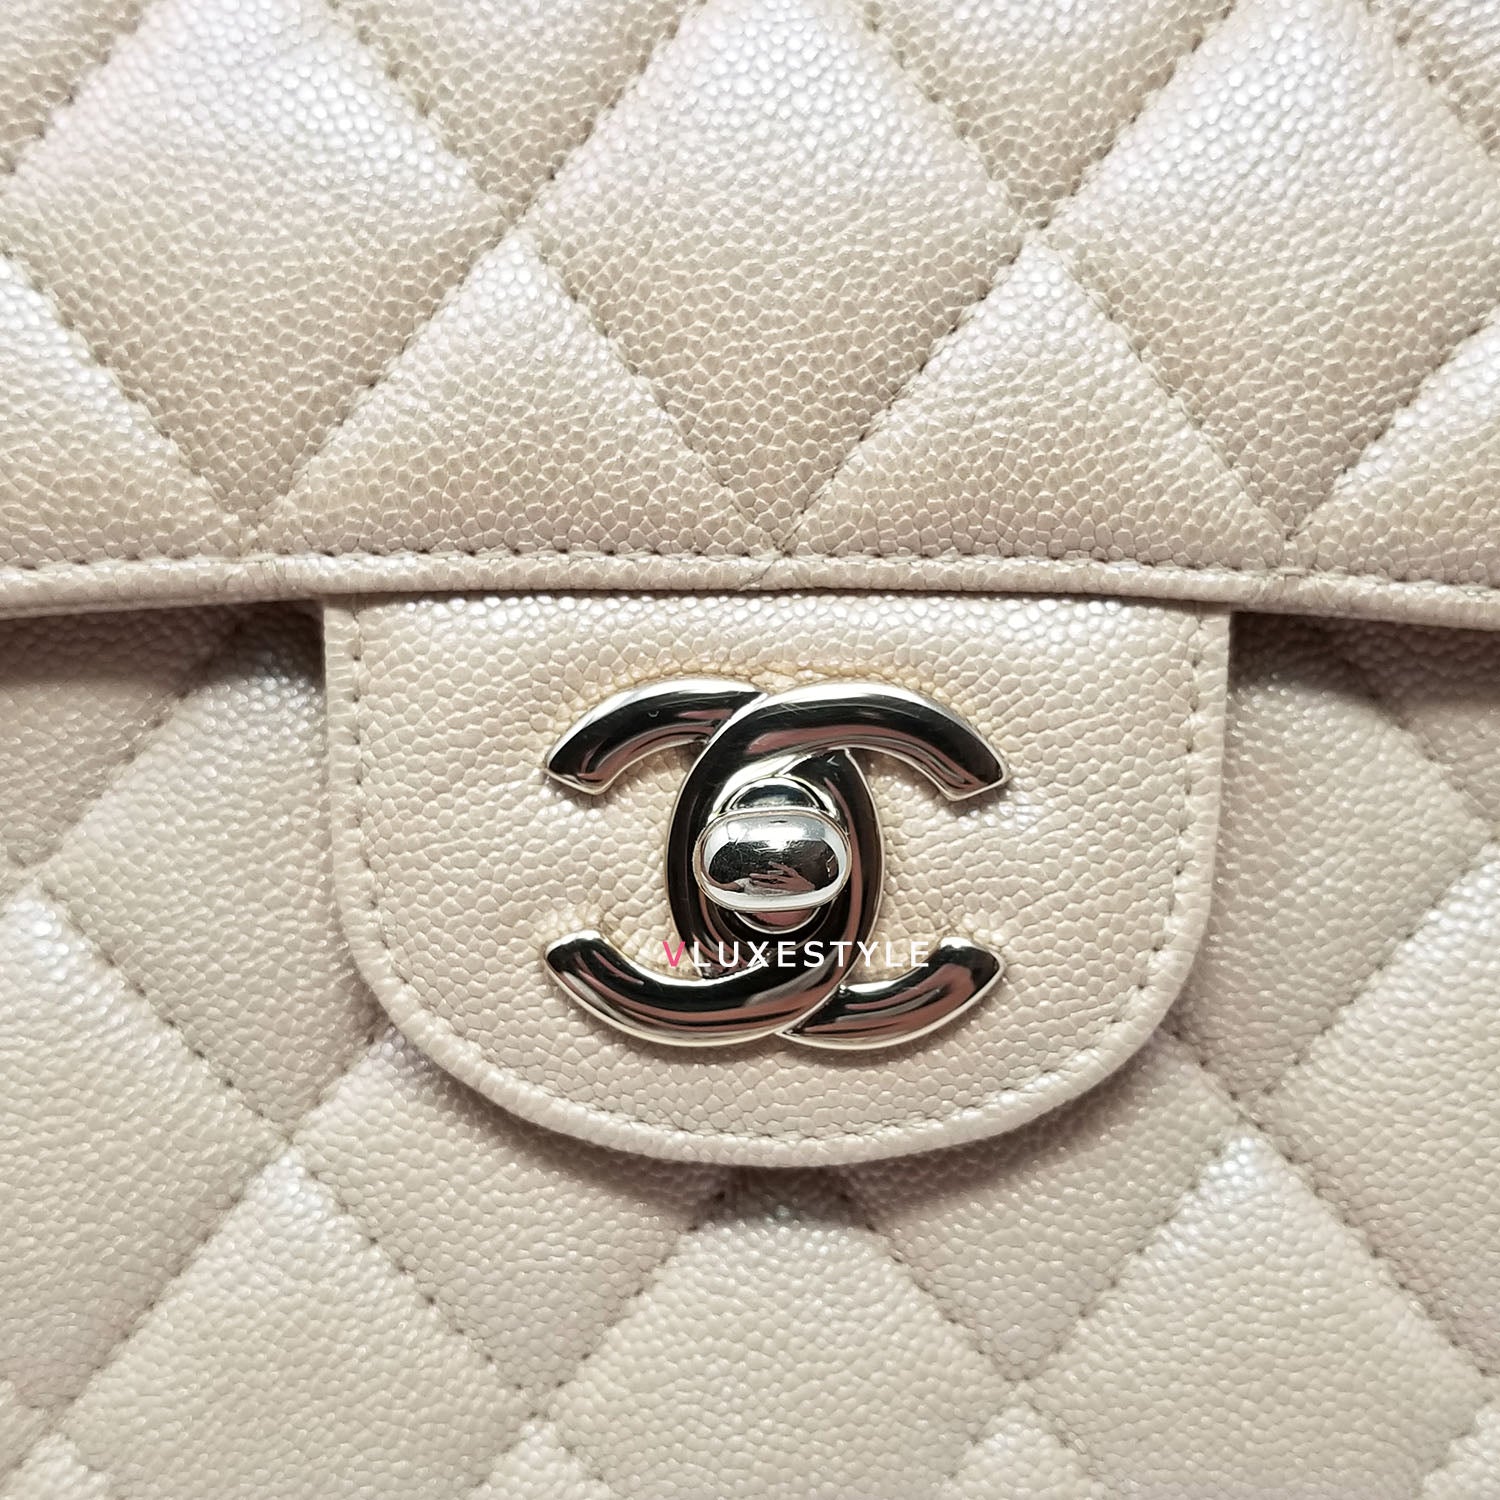 Chanel Classic Small Double Flap 19S Iridescent Light Beige